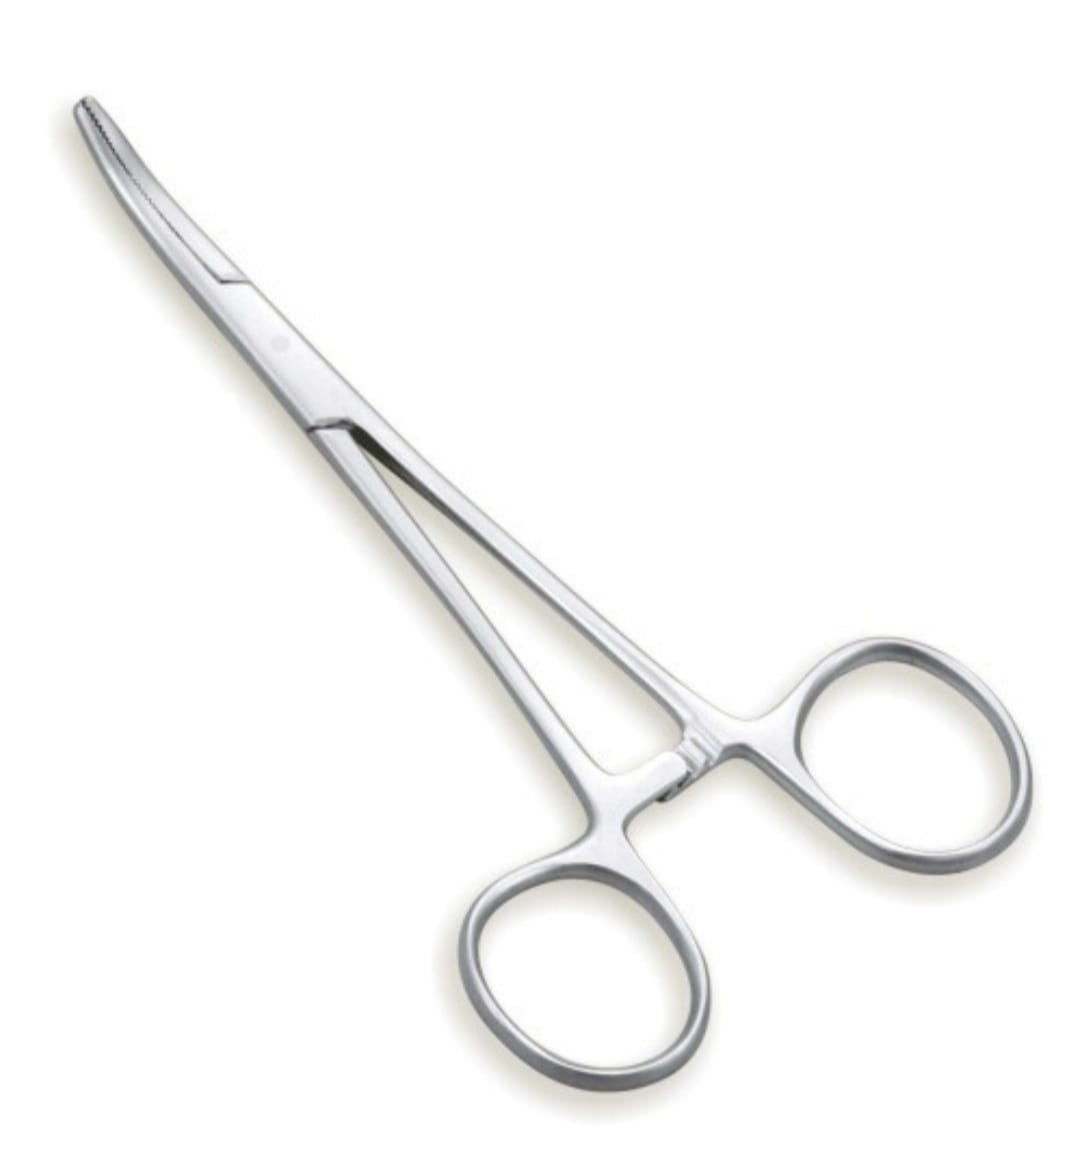 Artery Forceps Curved Stainless Steel 5 to 6 inches - Medstore